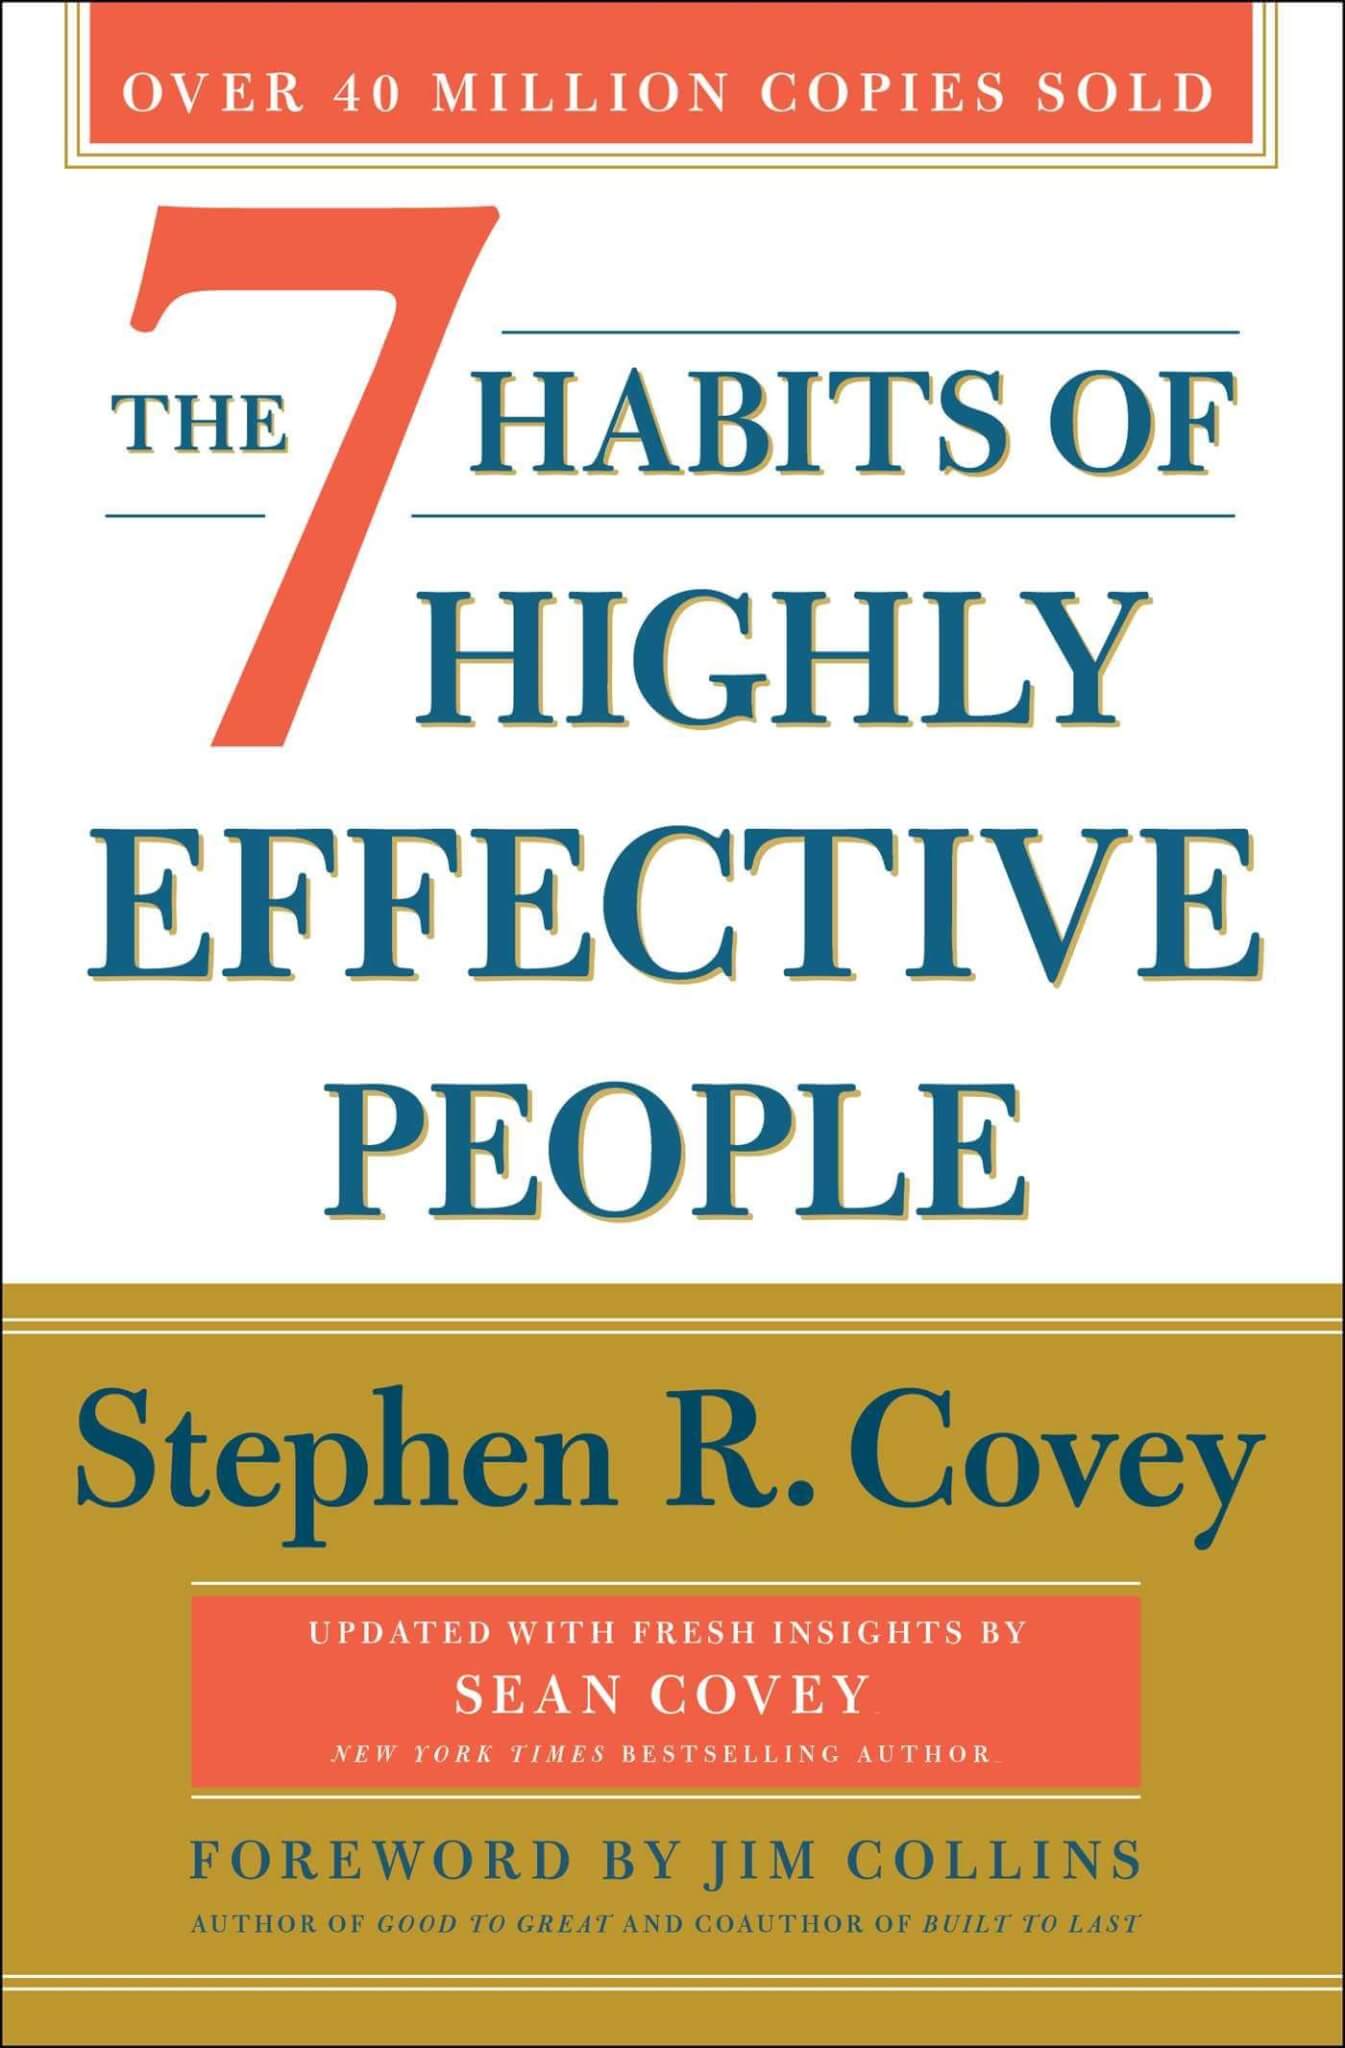 "7 Habits of Highly Effective People" by Stephen Covey